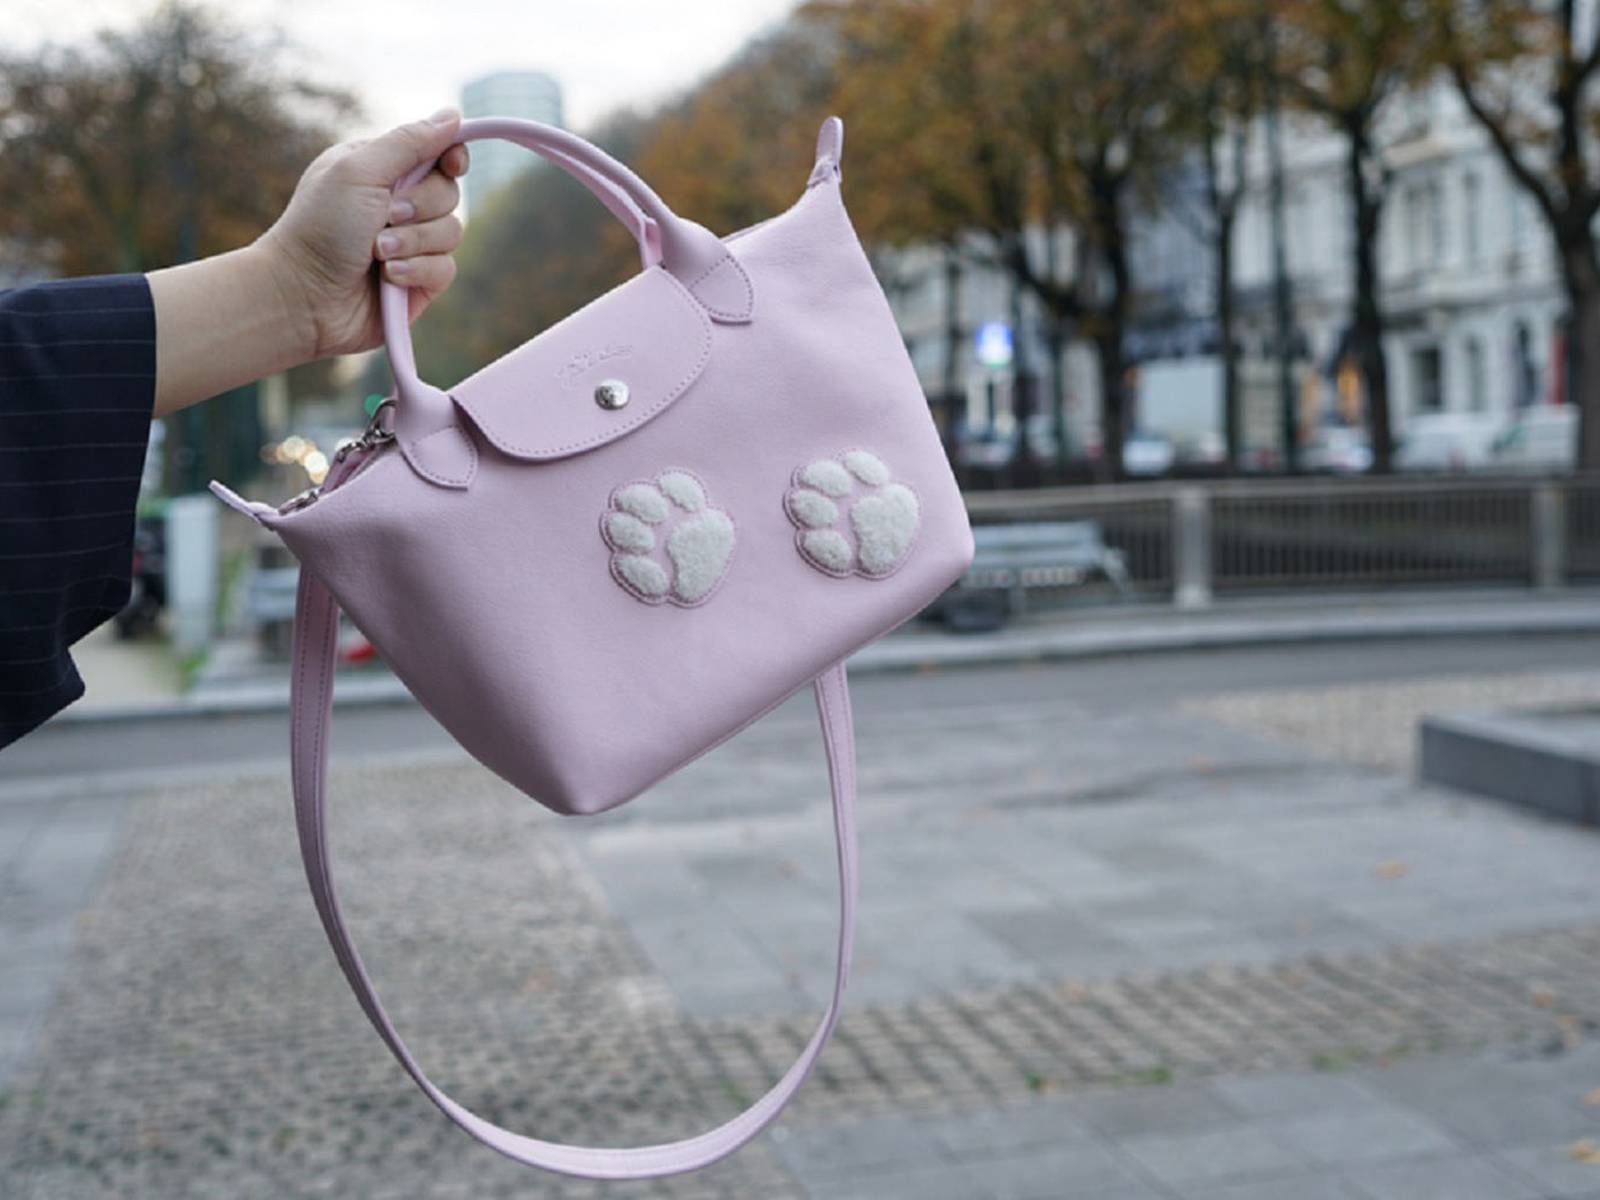 Longchamp to Invest in China to Revive Sales